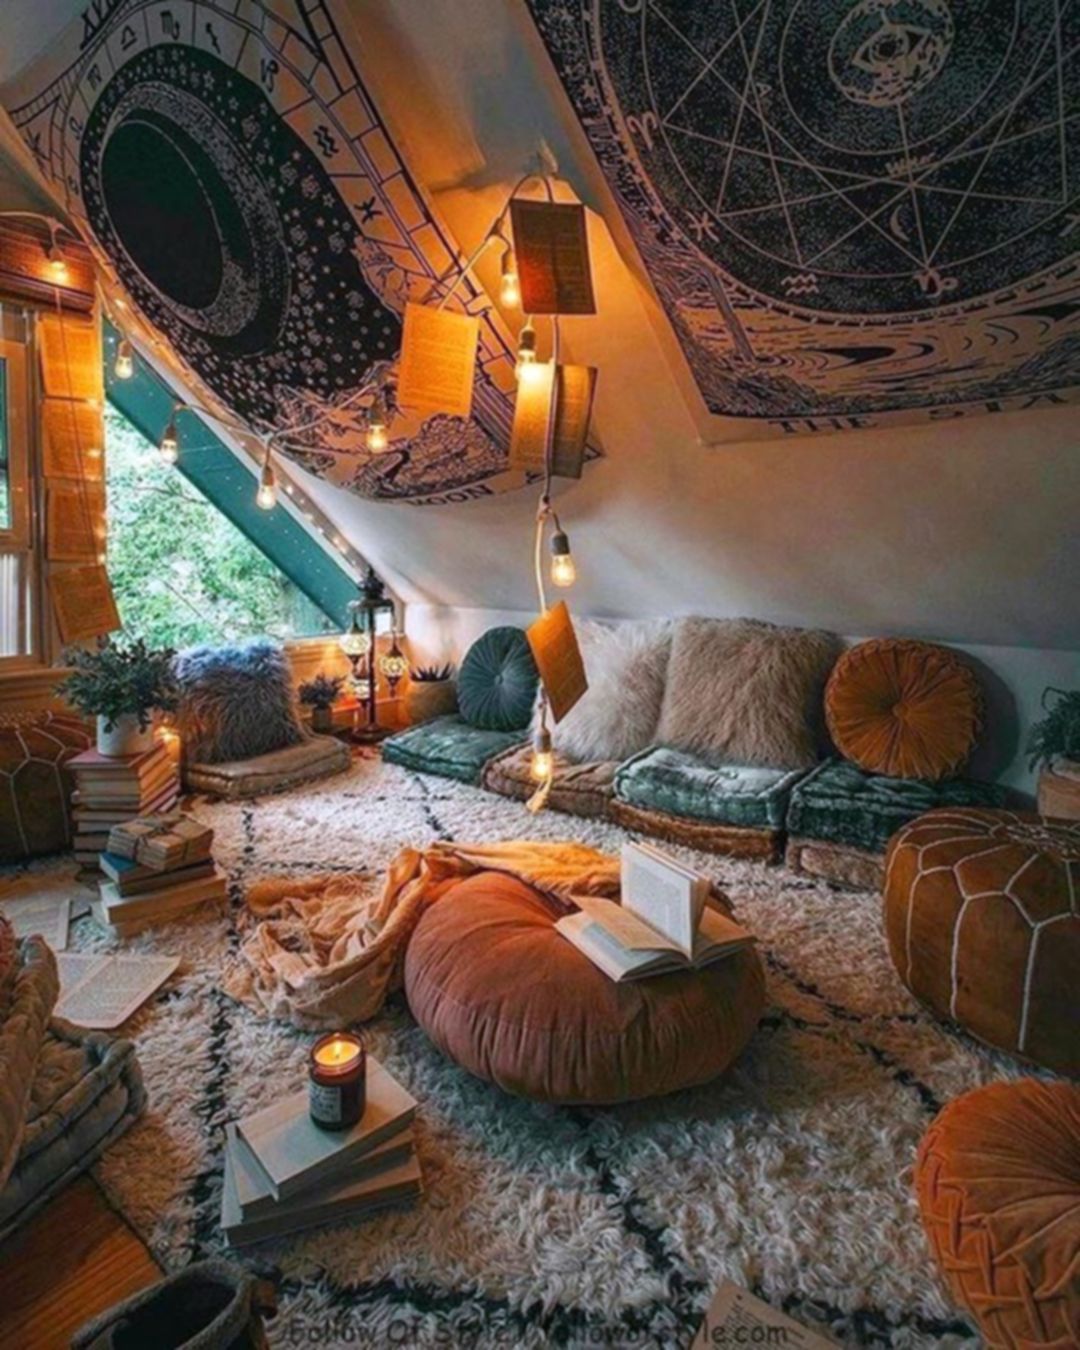 How To Create A Hippie Aesthetic Room On A Budget